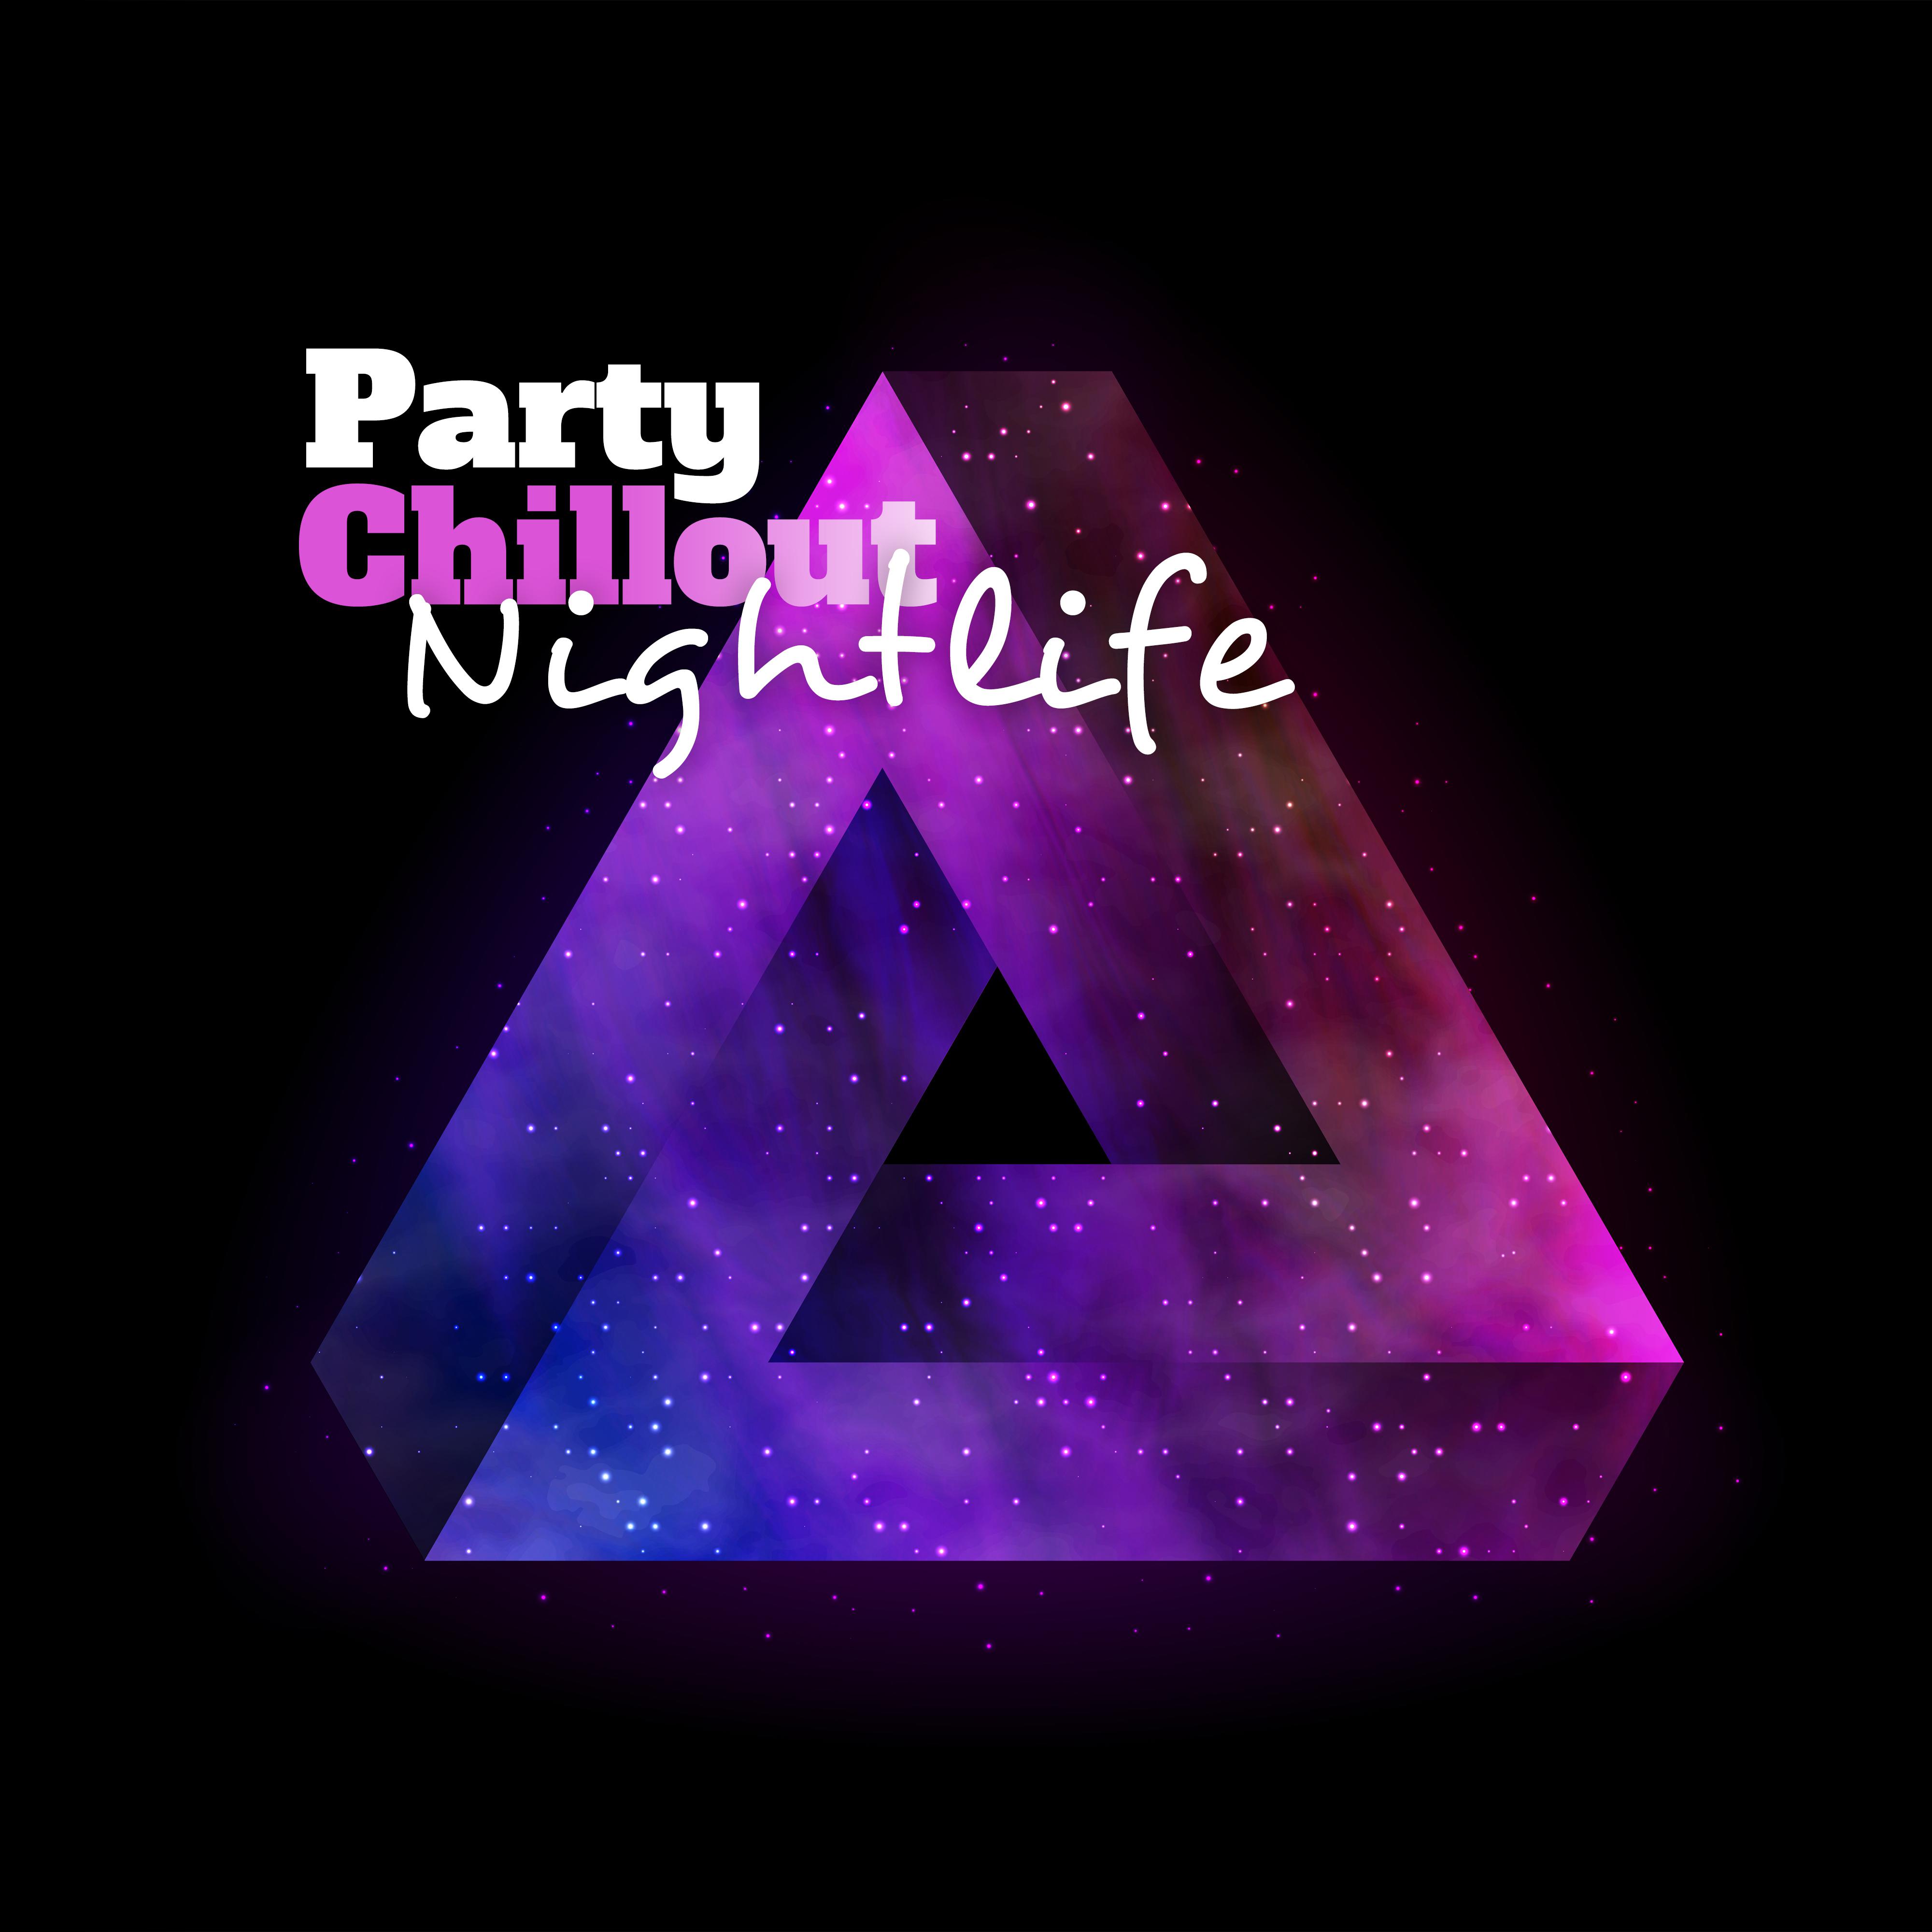 Party Chillout Nightlife: 2019 Chill Out Electronic Vibes, Music Created for Good Dance Party All Night Long, Dynamic Beats & Electro Melodies, Best Low BPM Club House Styled Songs